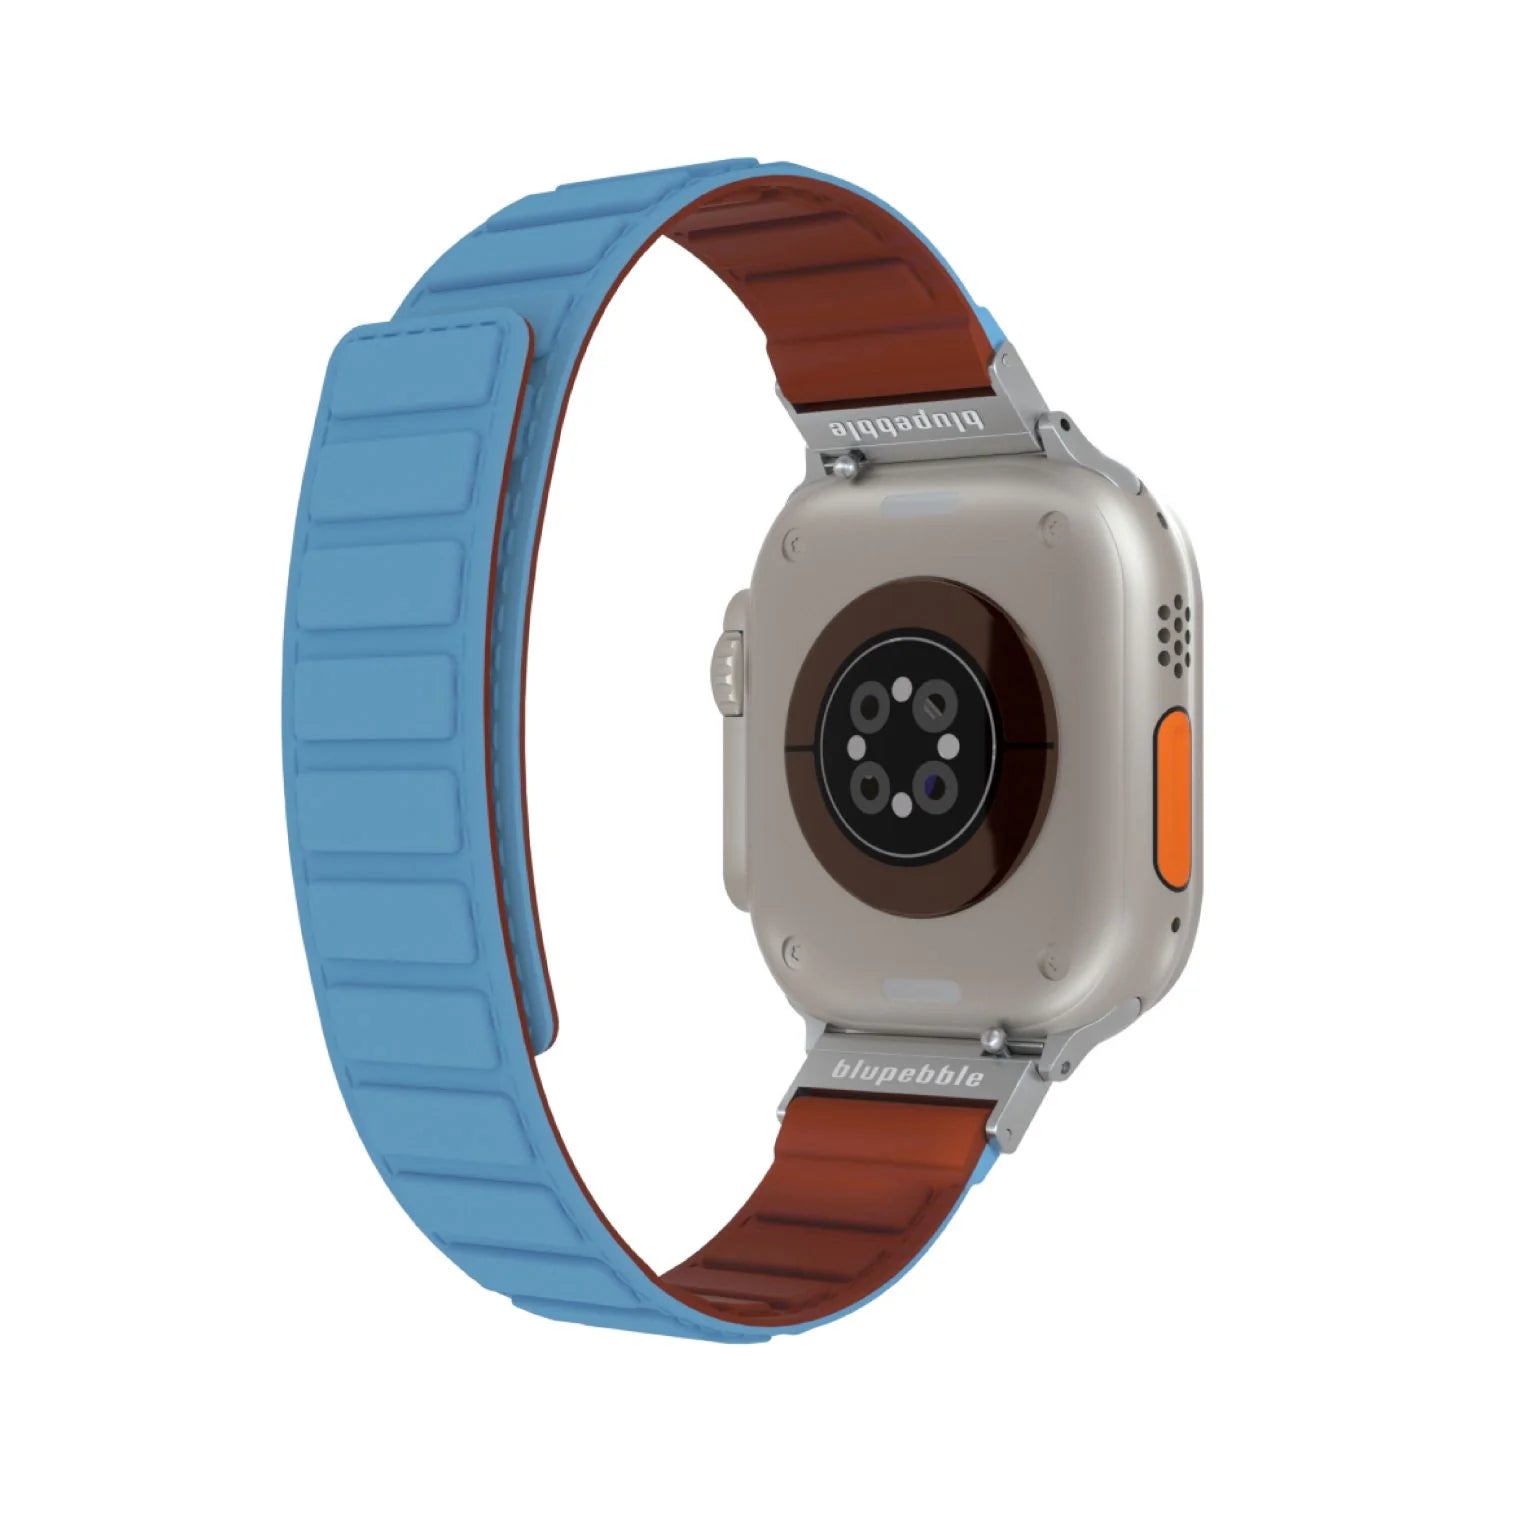 Blupebble Silicone Reversible Magnetic Strap - Blue/Brown